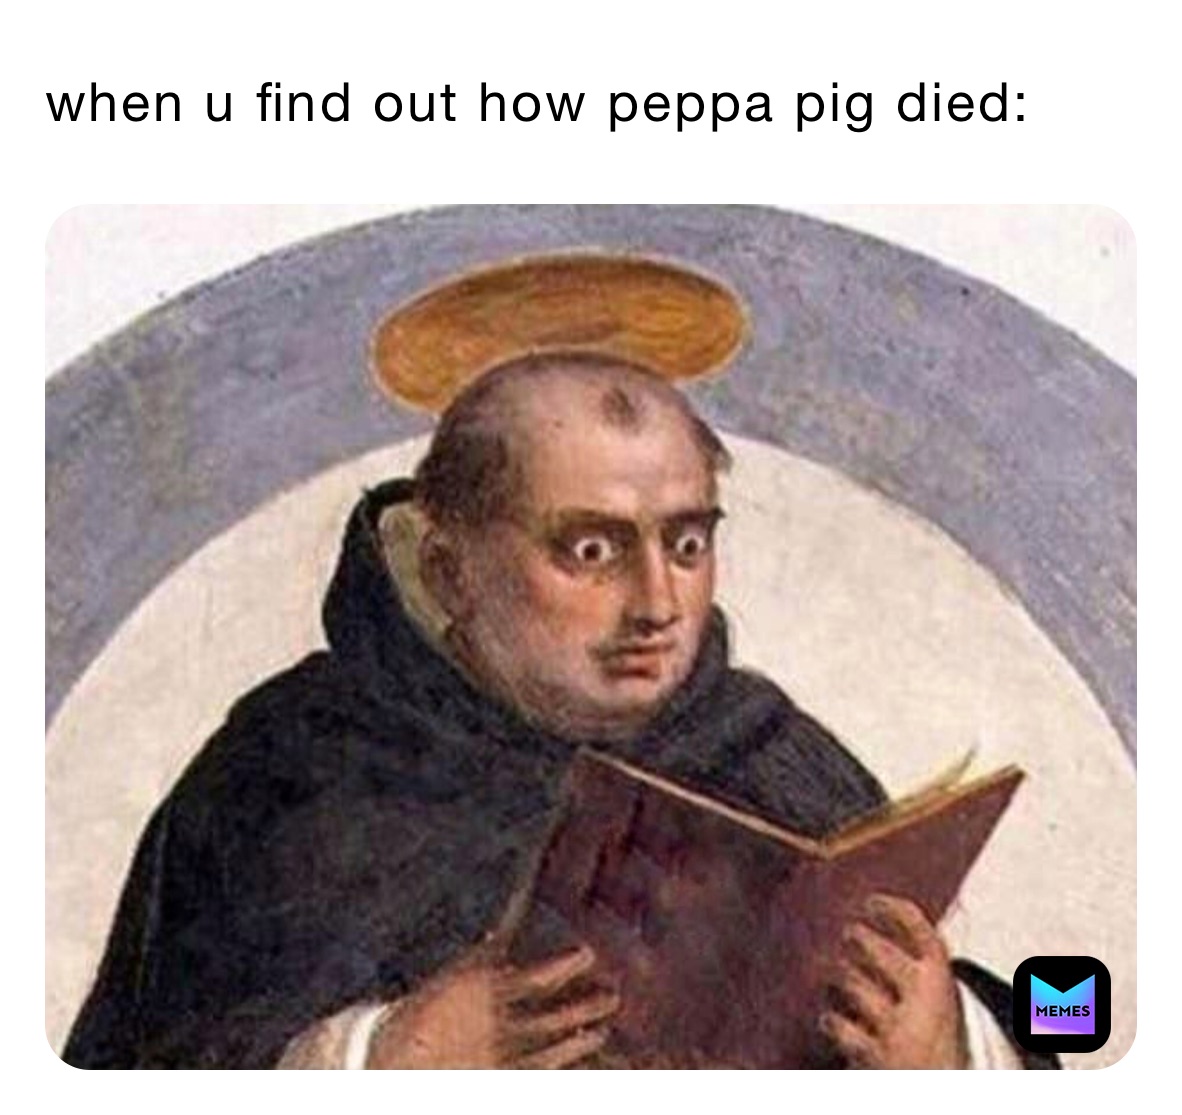 when u find out how peppa pig died: